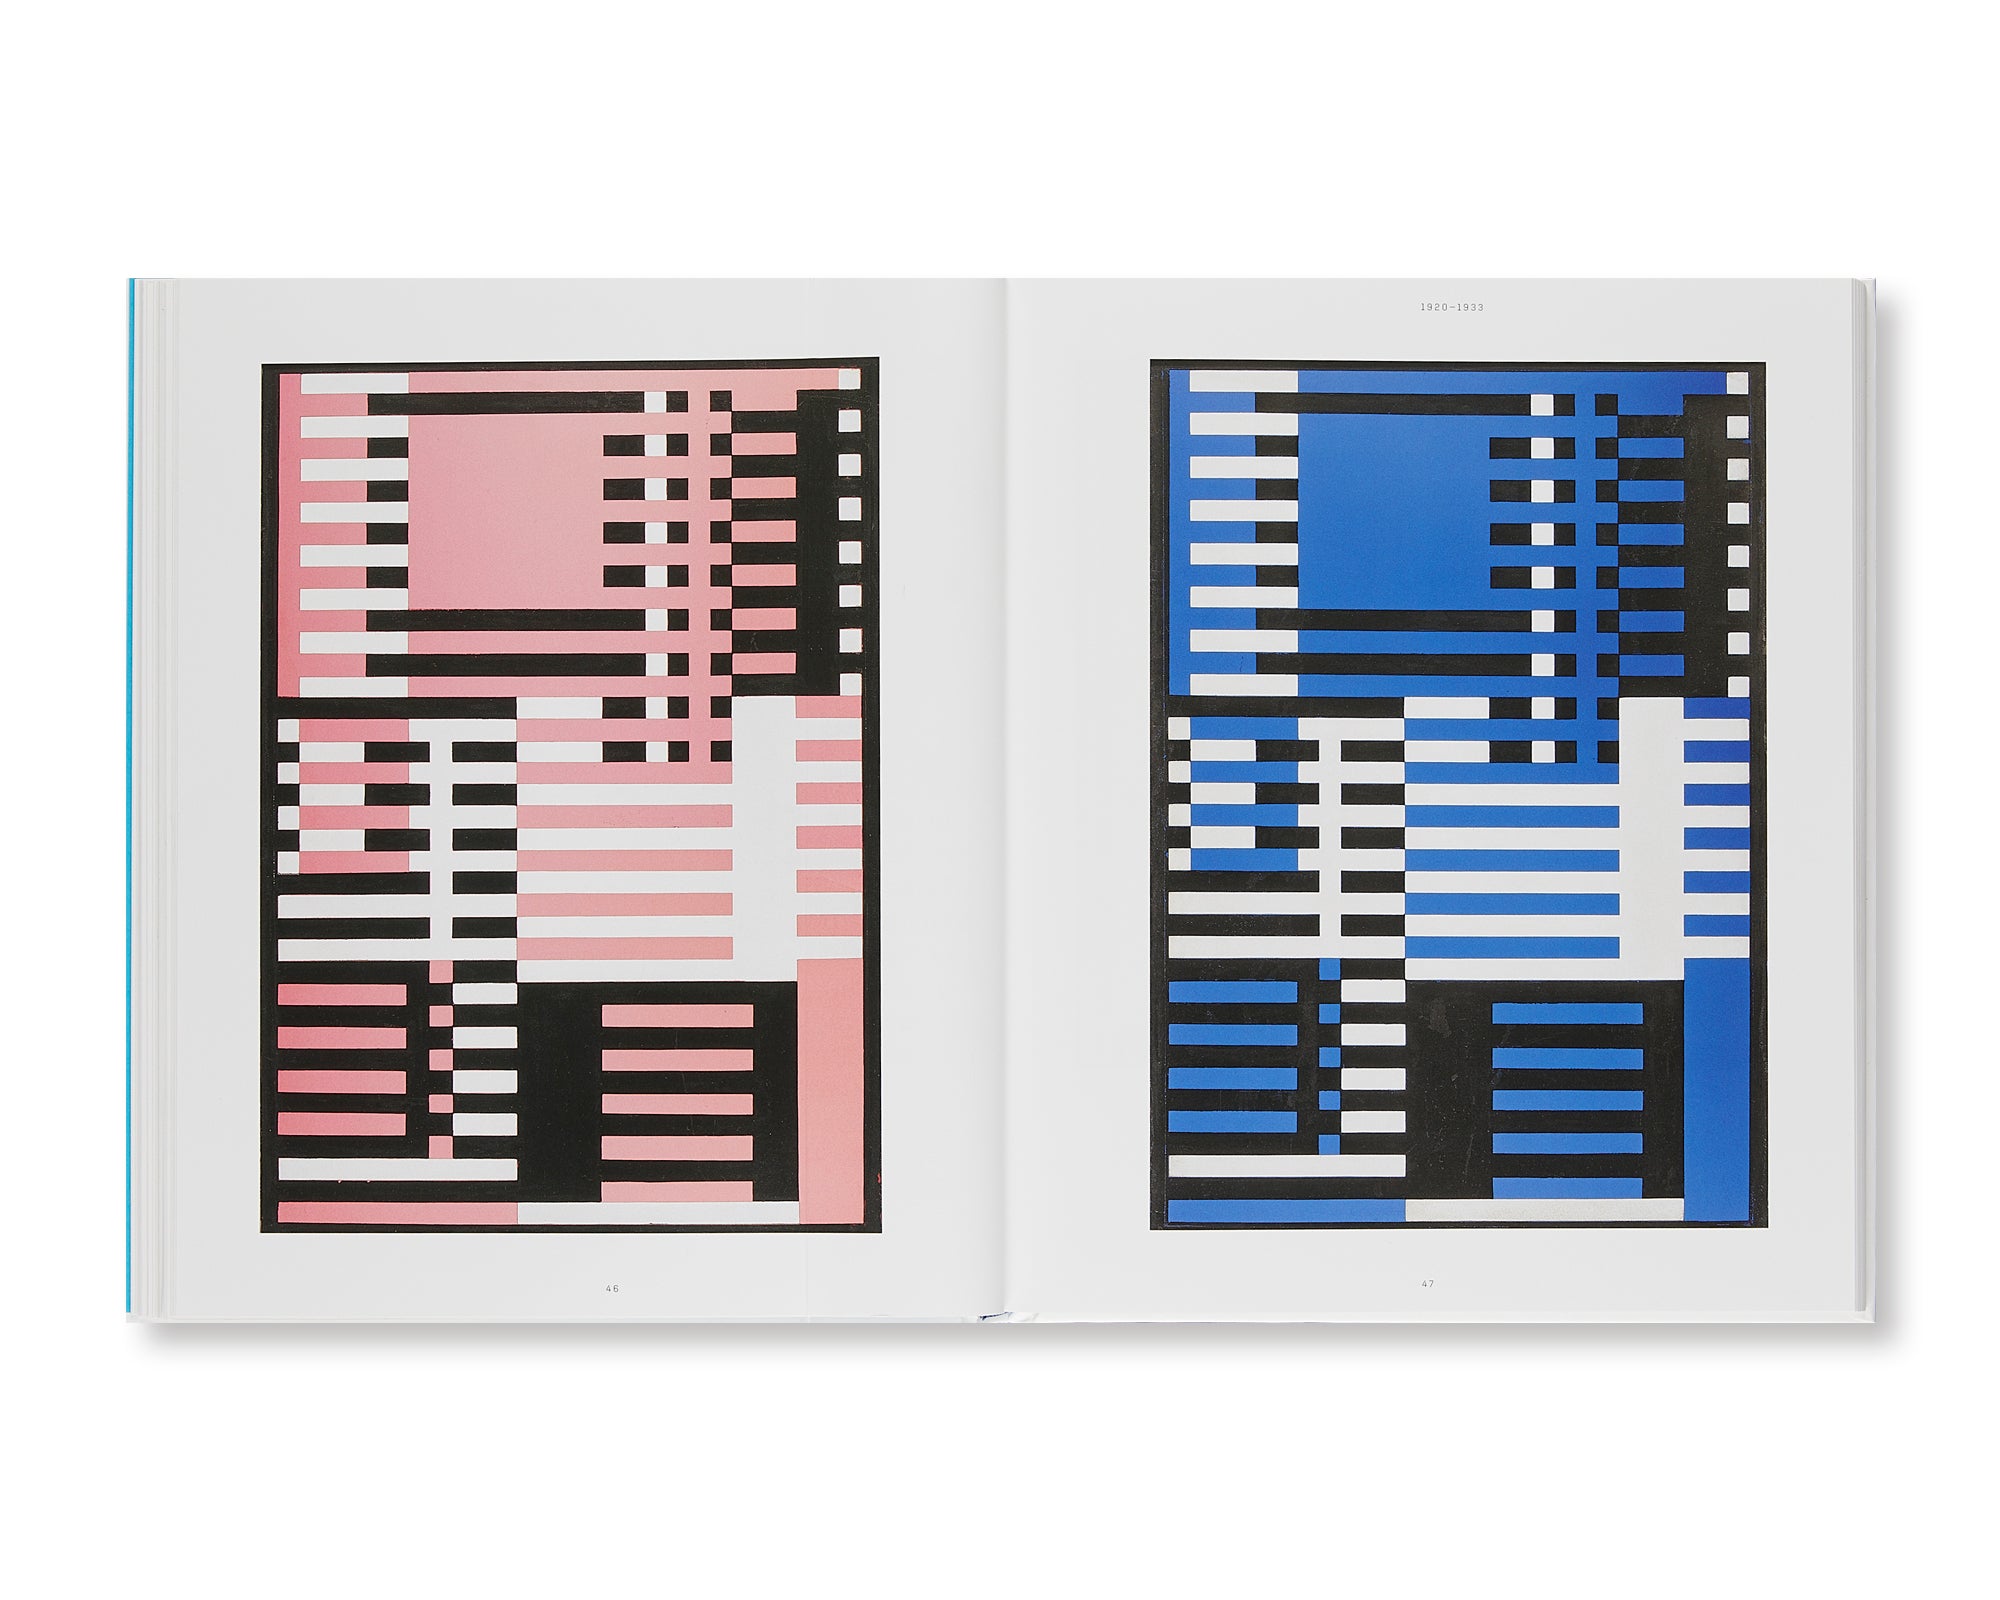 ART AND LIFE by Anni Albers, Josef Albers